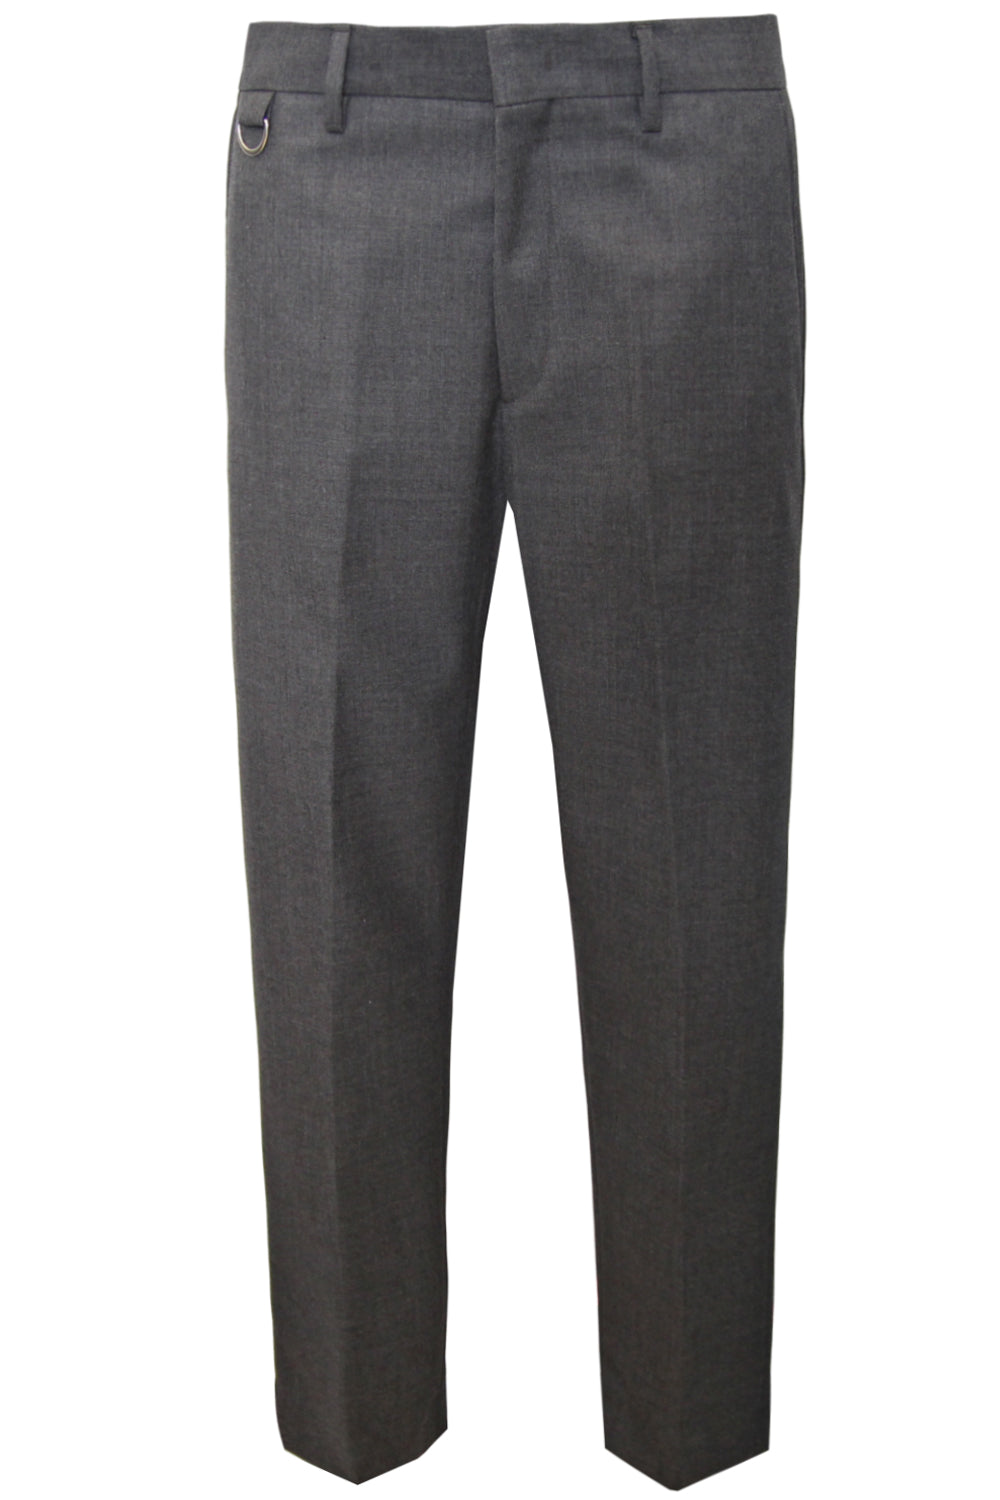 Image of LOW BRAND Pantalone Relaxed Fit